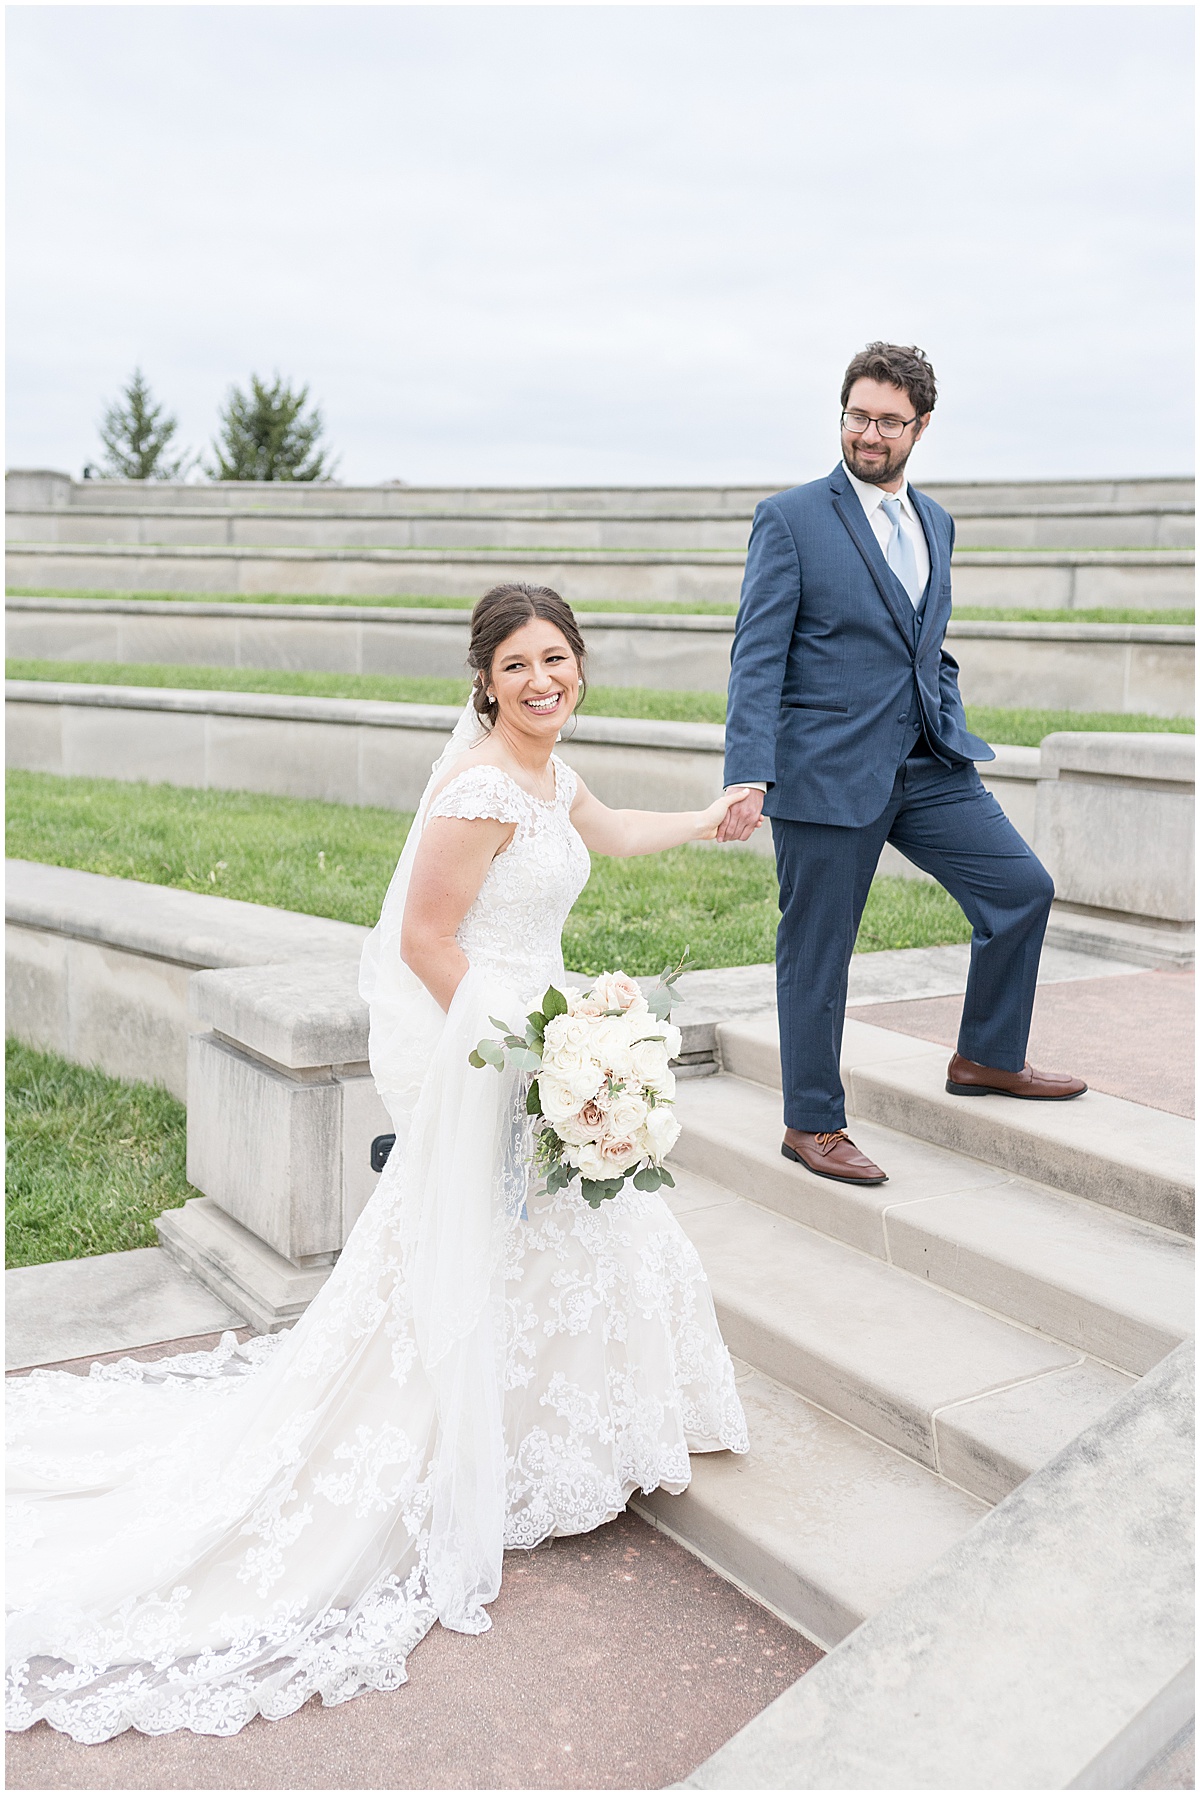 Bride and groom walking up stairs during wedding photos at Coxhall Gardens in Carmel, Indiana